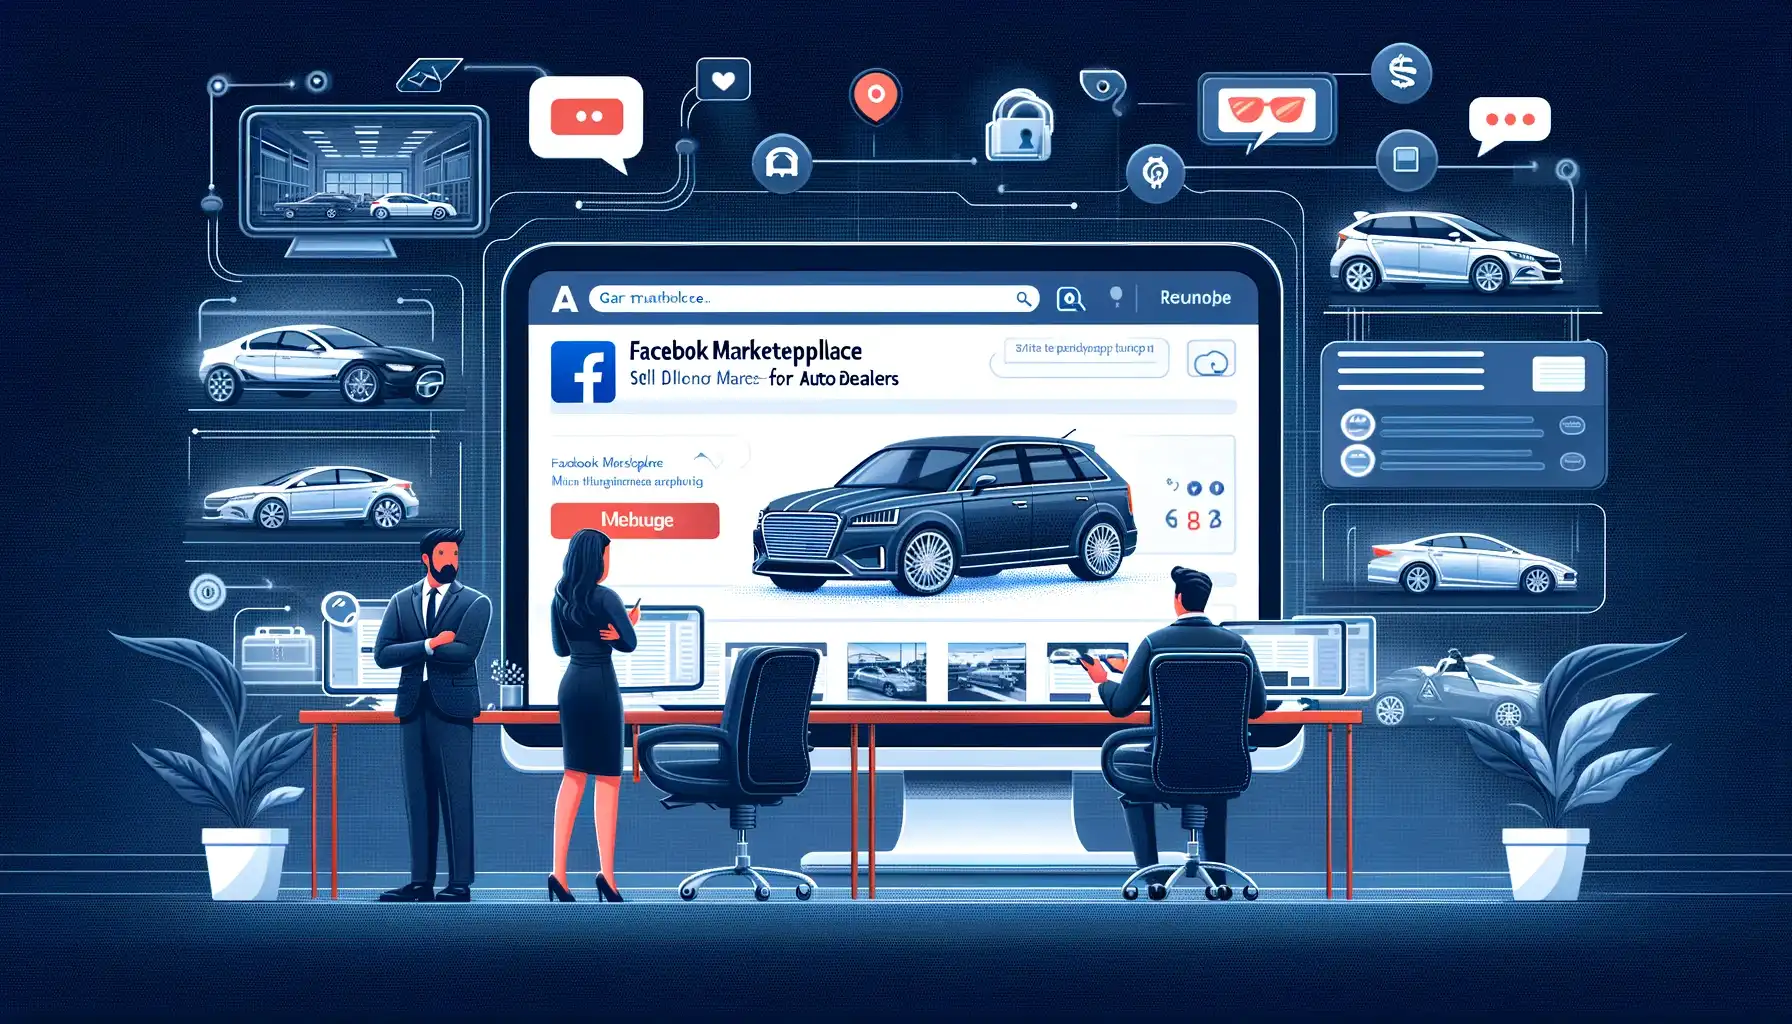 How to Sell Used Cars on Facebook Marketplace